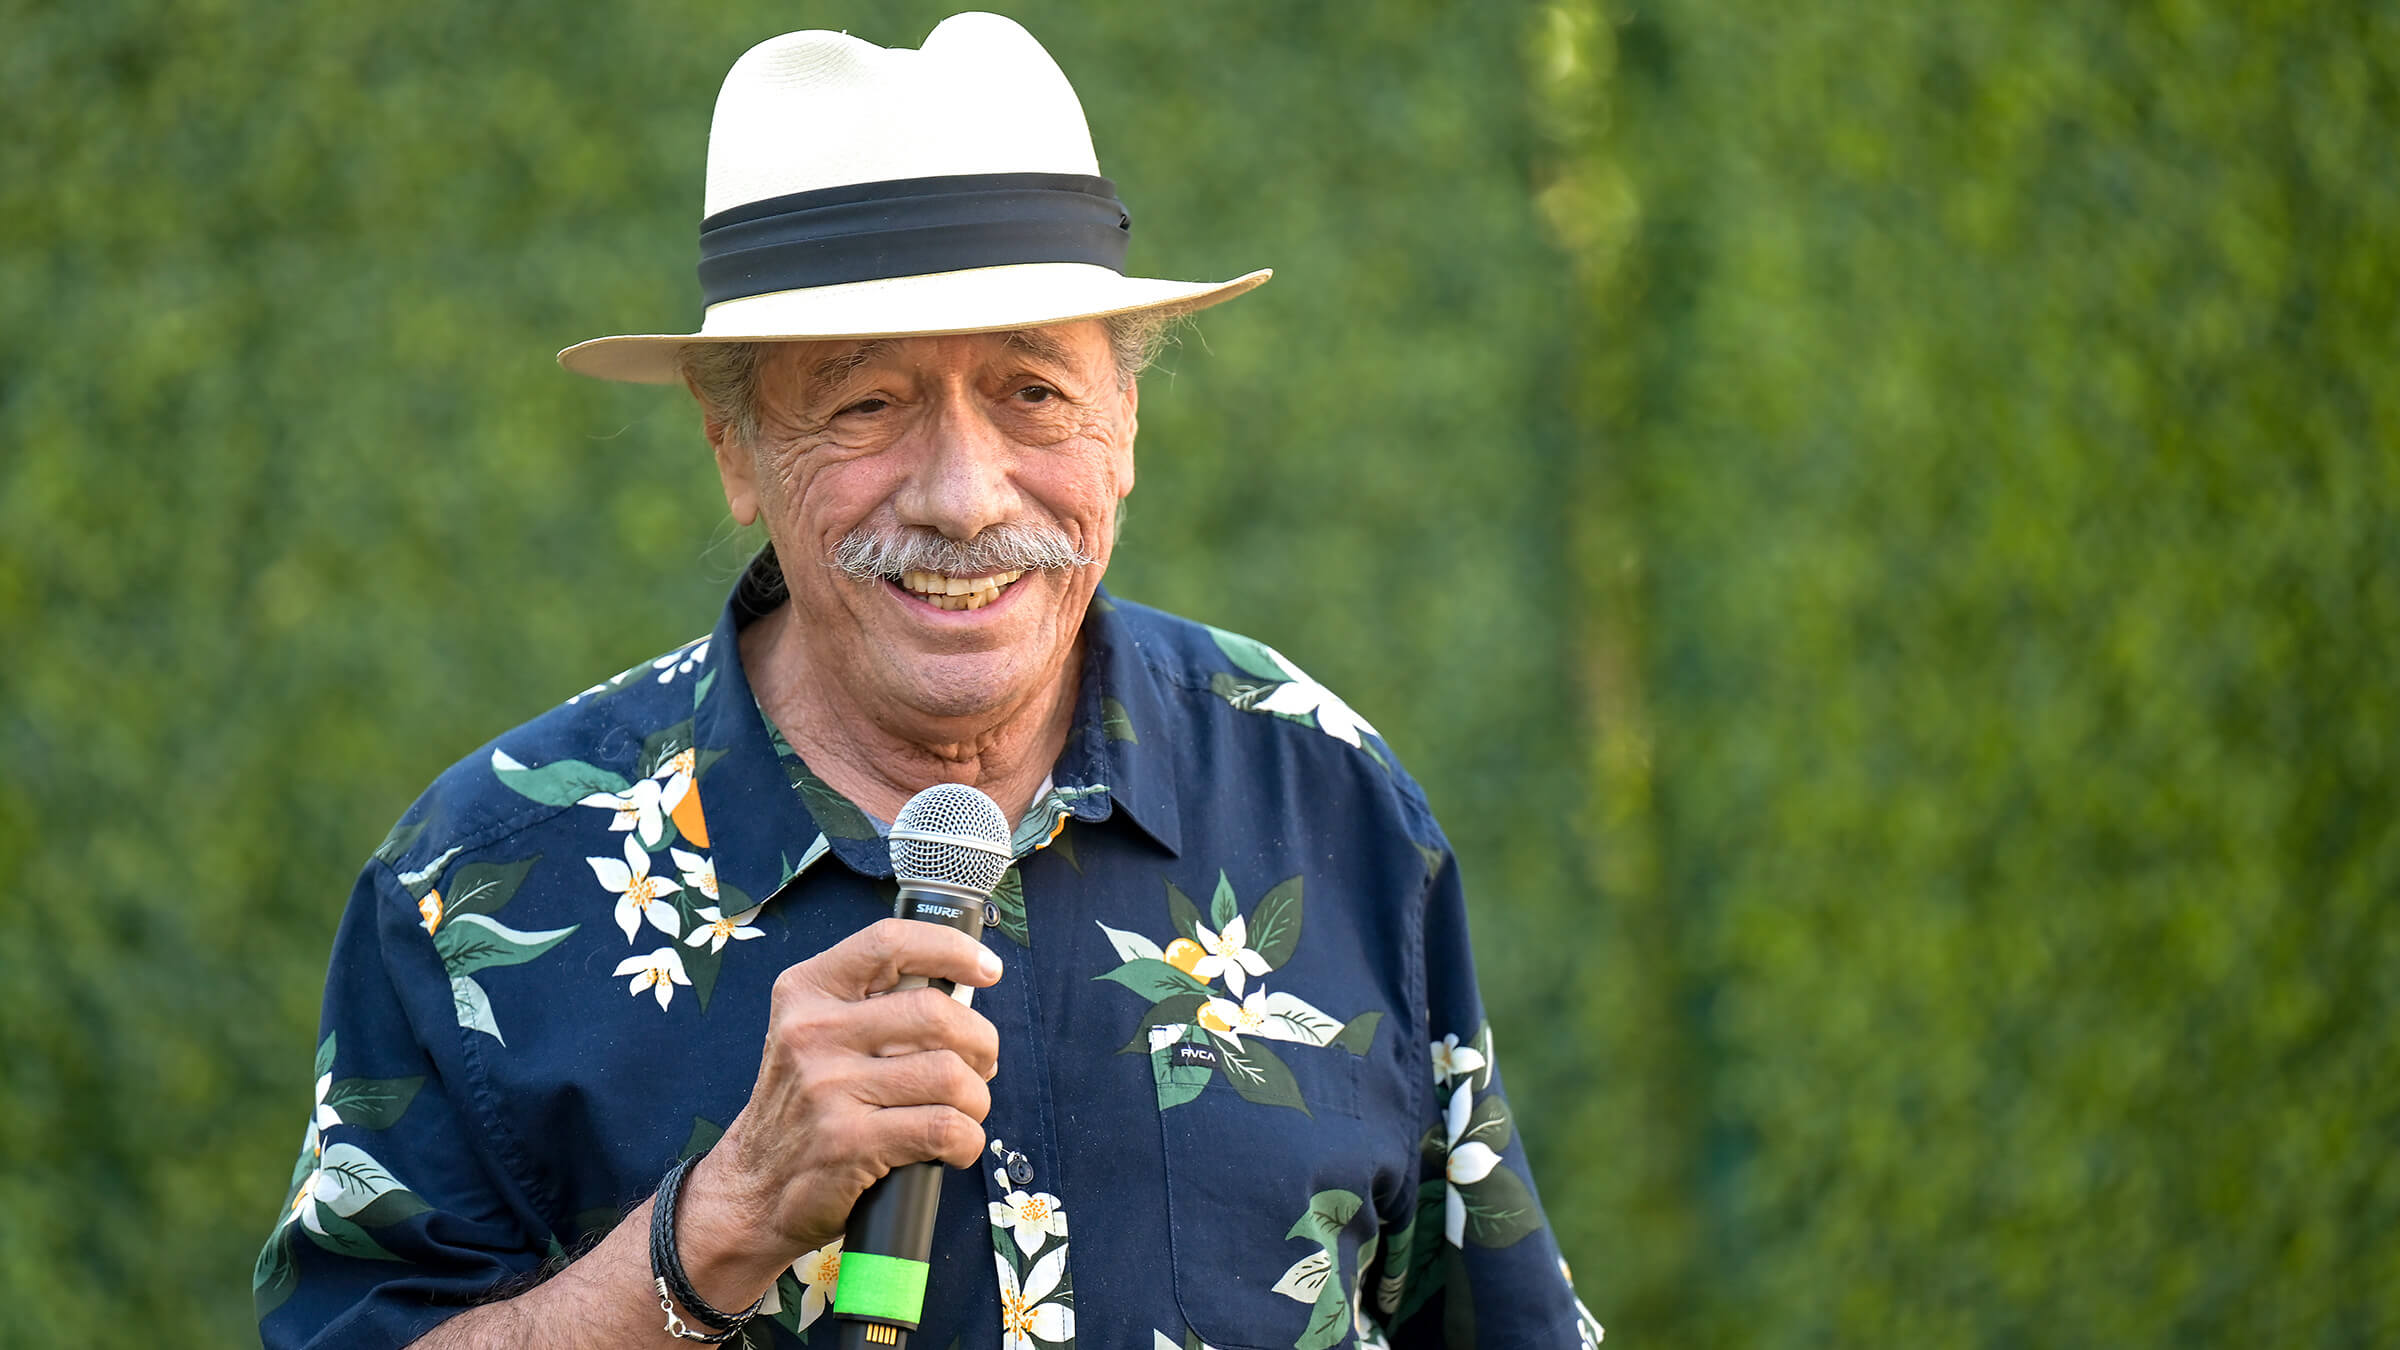 James Olmos speaking, wearing a hat and flowered patterned blue shirt.